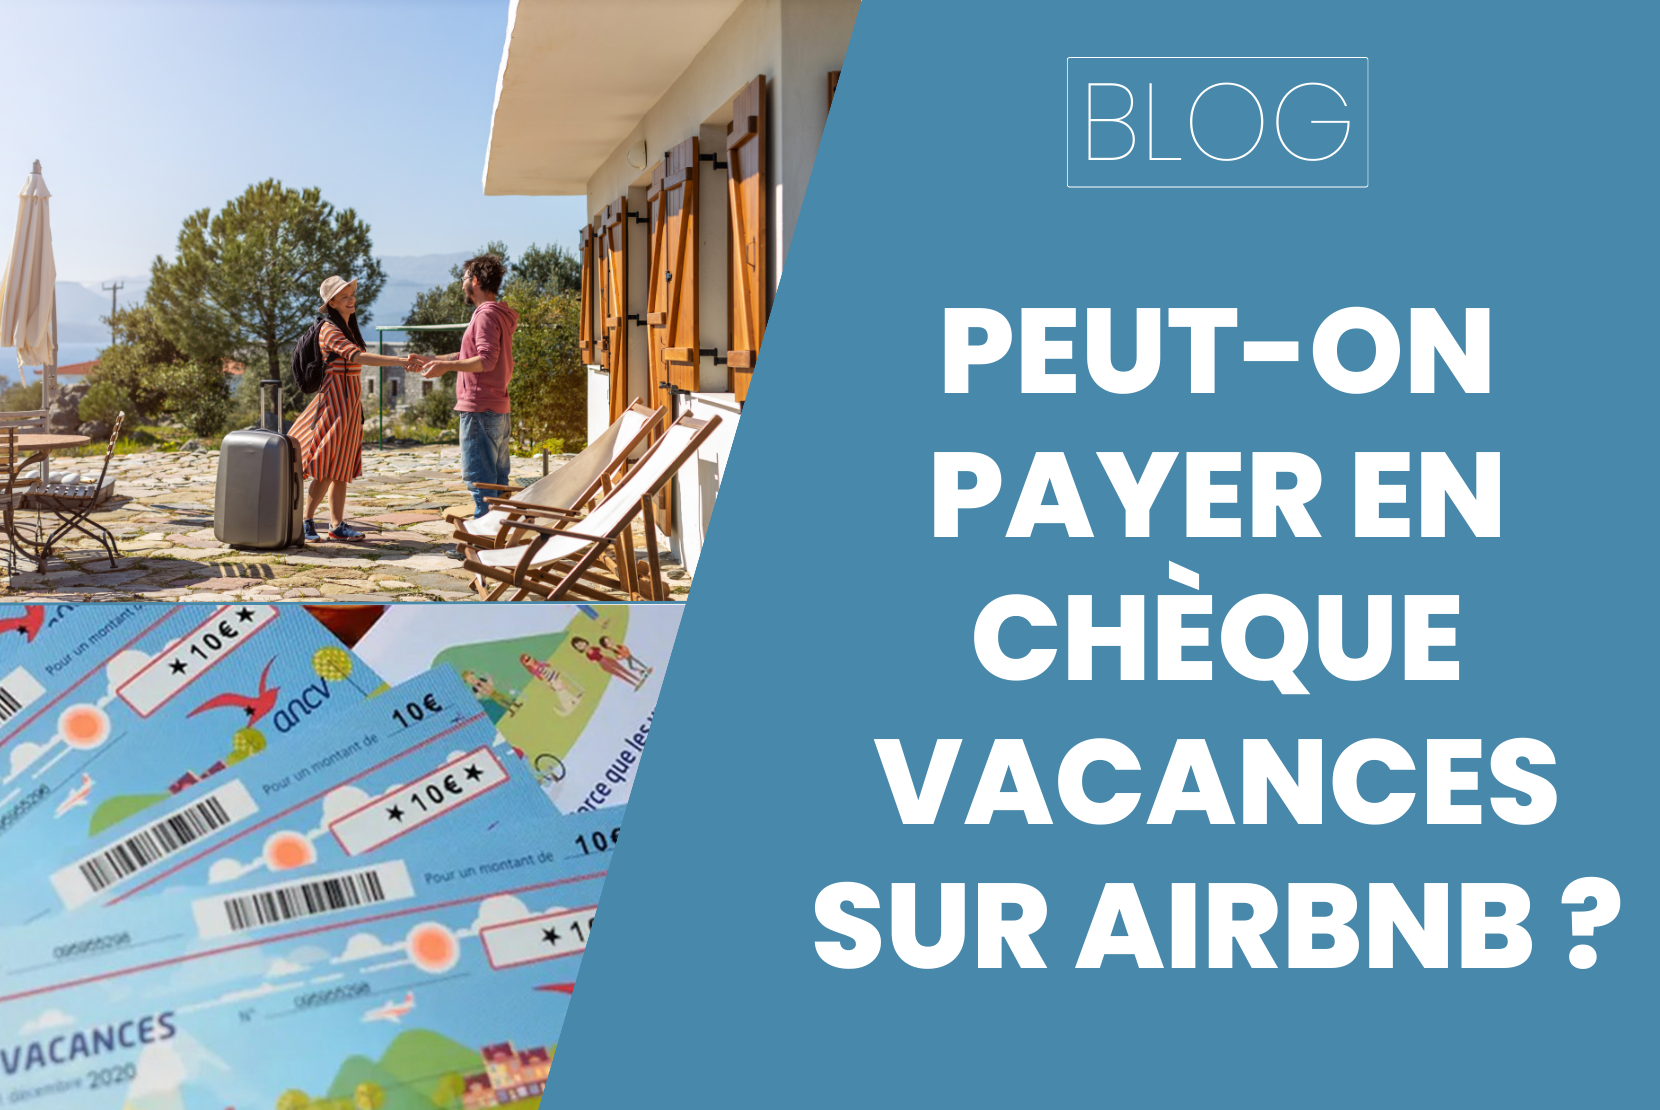 Airbnb cheque vacances : Peut-on payer avec ?